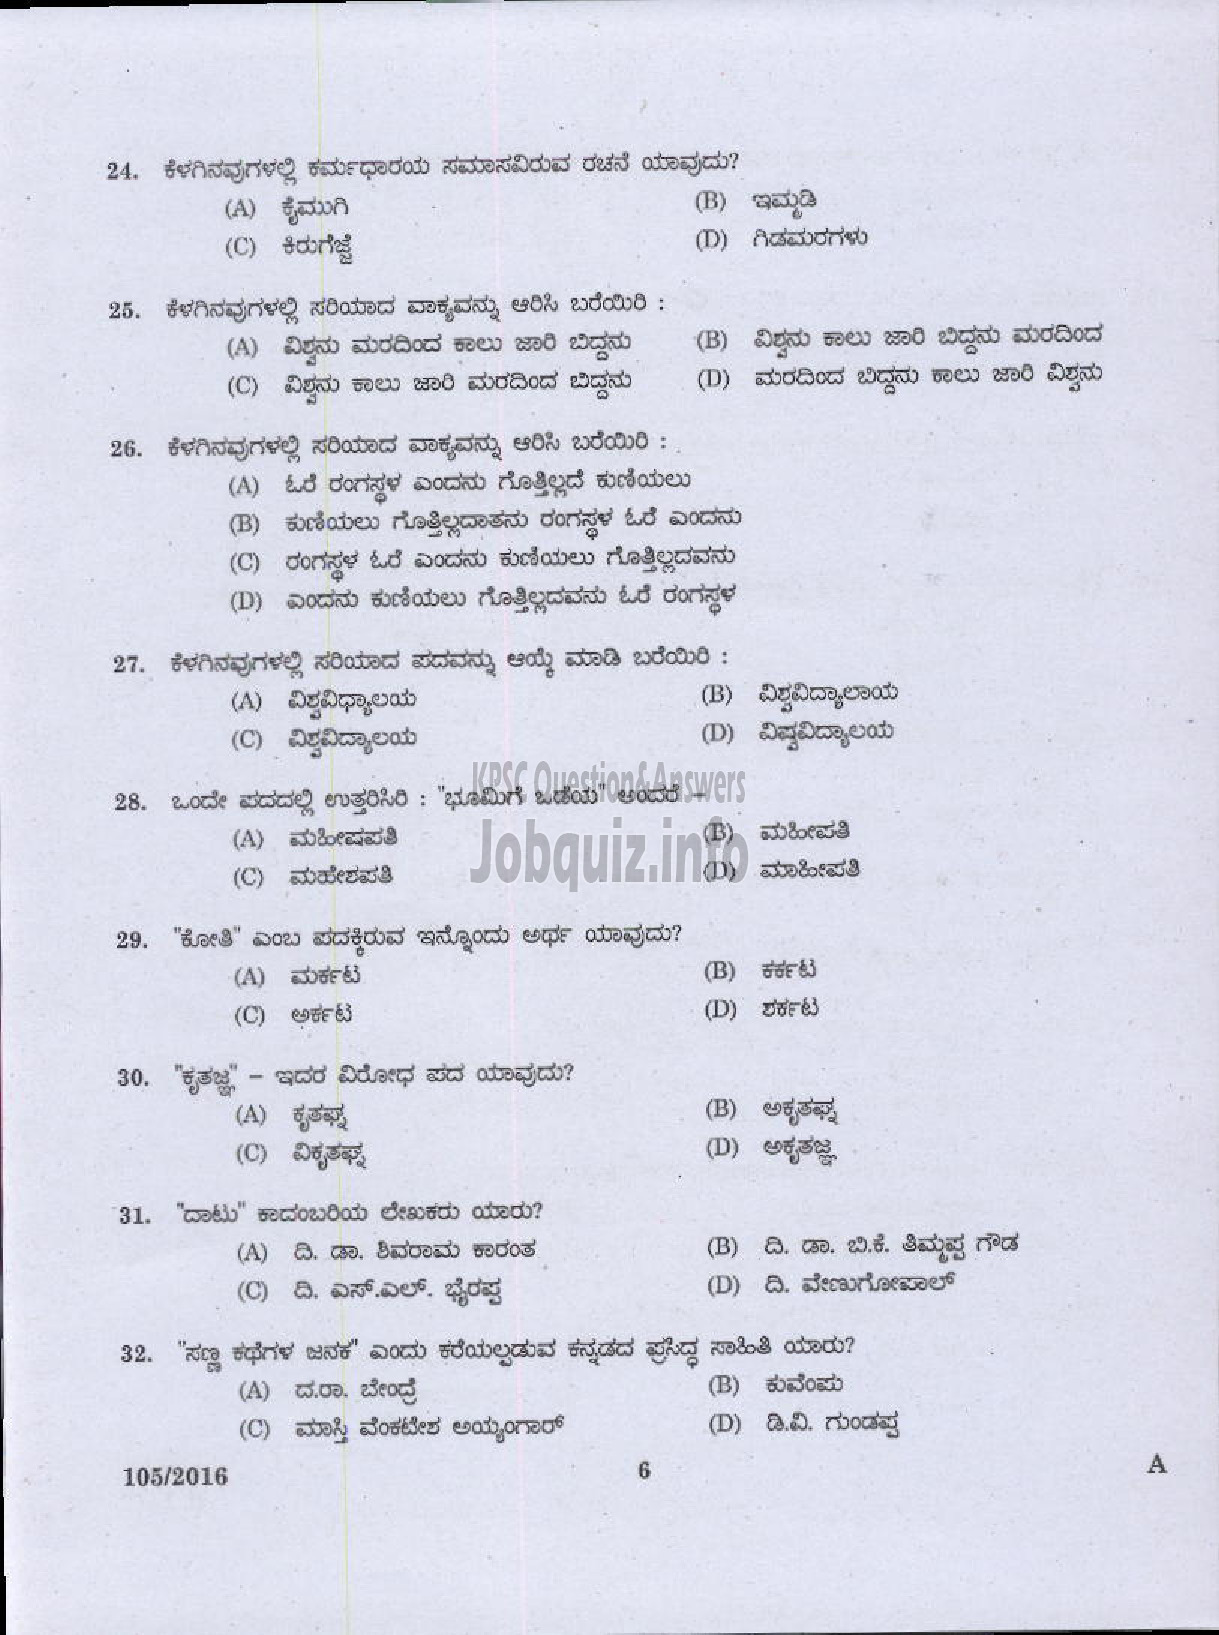 Kerala PSC Question Paper - LOWER DIVISION CLERK KANNADA AND MALAYALAM KNOWING VARIOUS-4